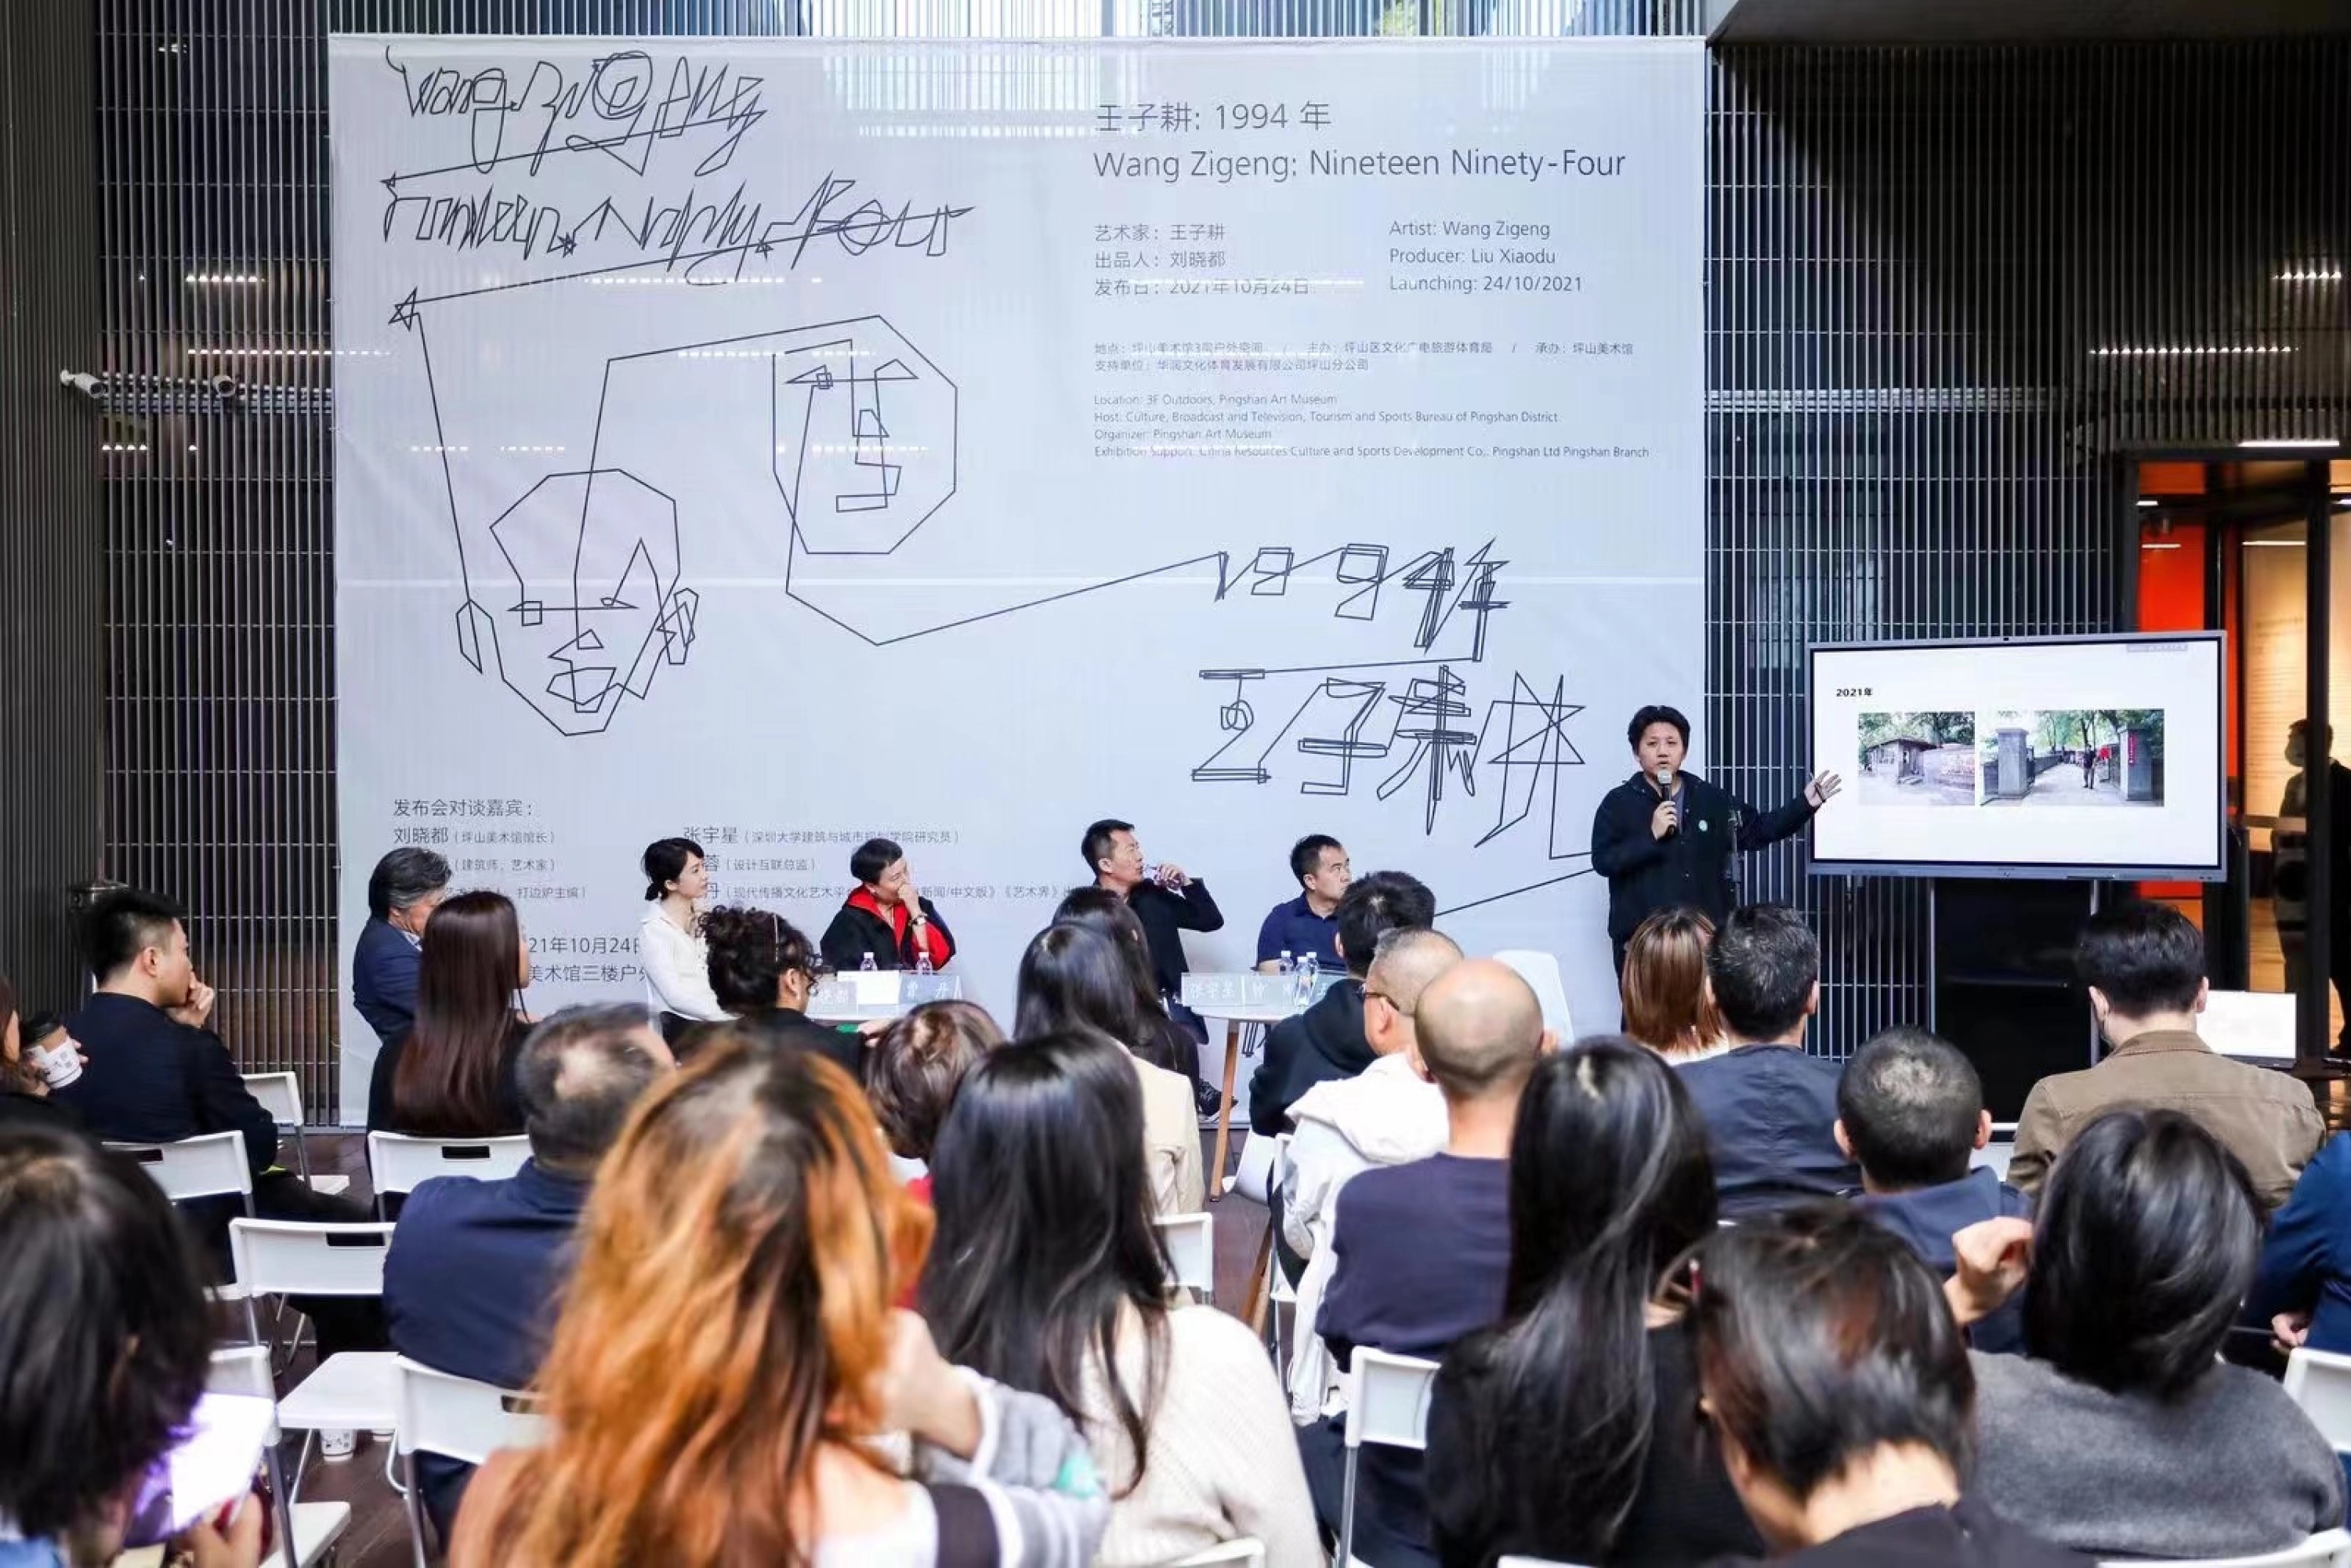 Zigeng Wang's Work “1994" was Invited to Participate in “Hometown Series" Exhibition at Shenzhen Pingshan Art Museum and Held a Press Conference